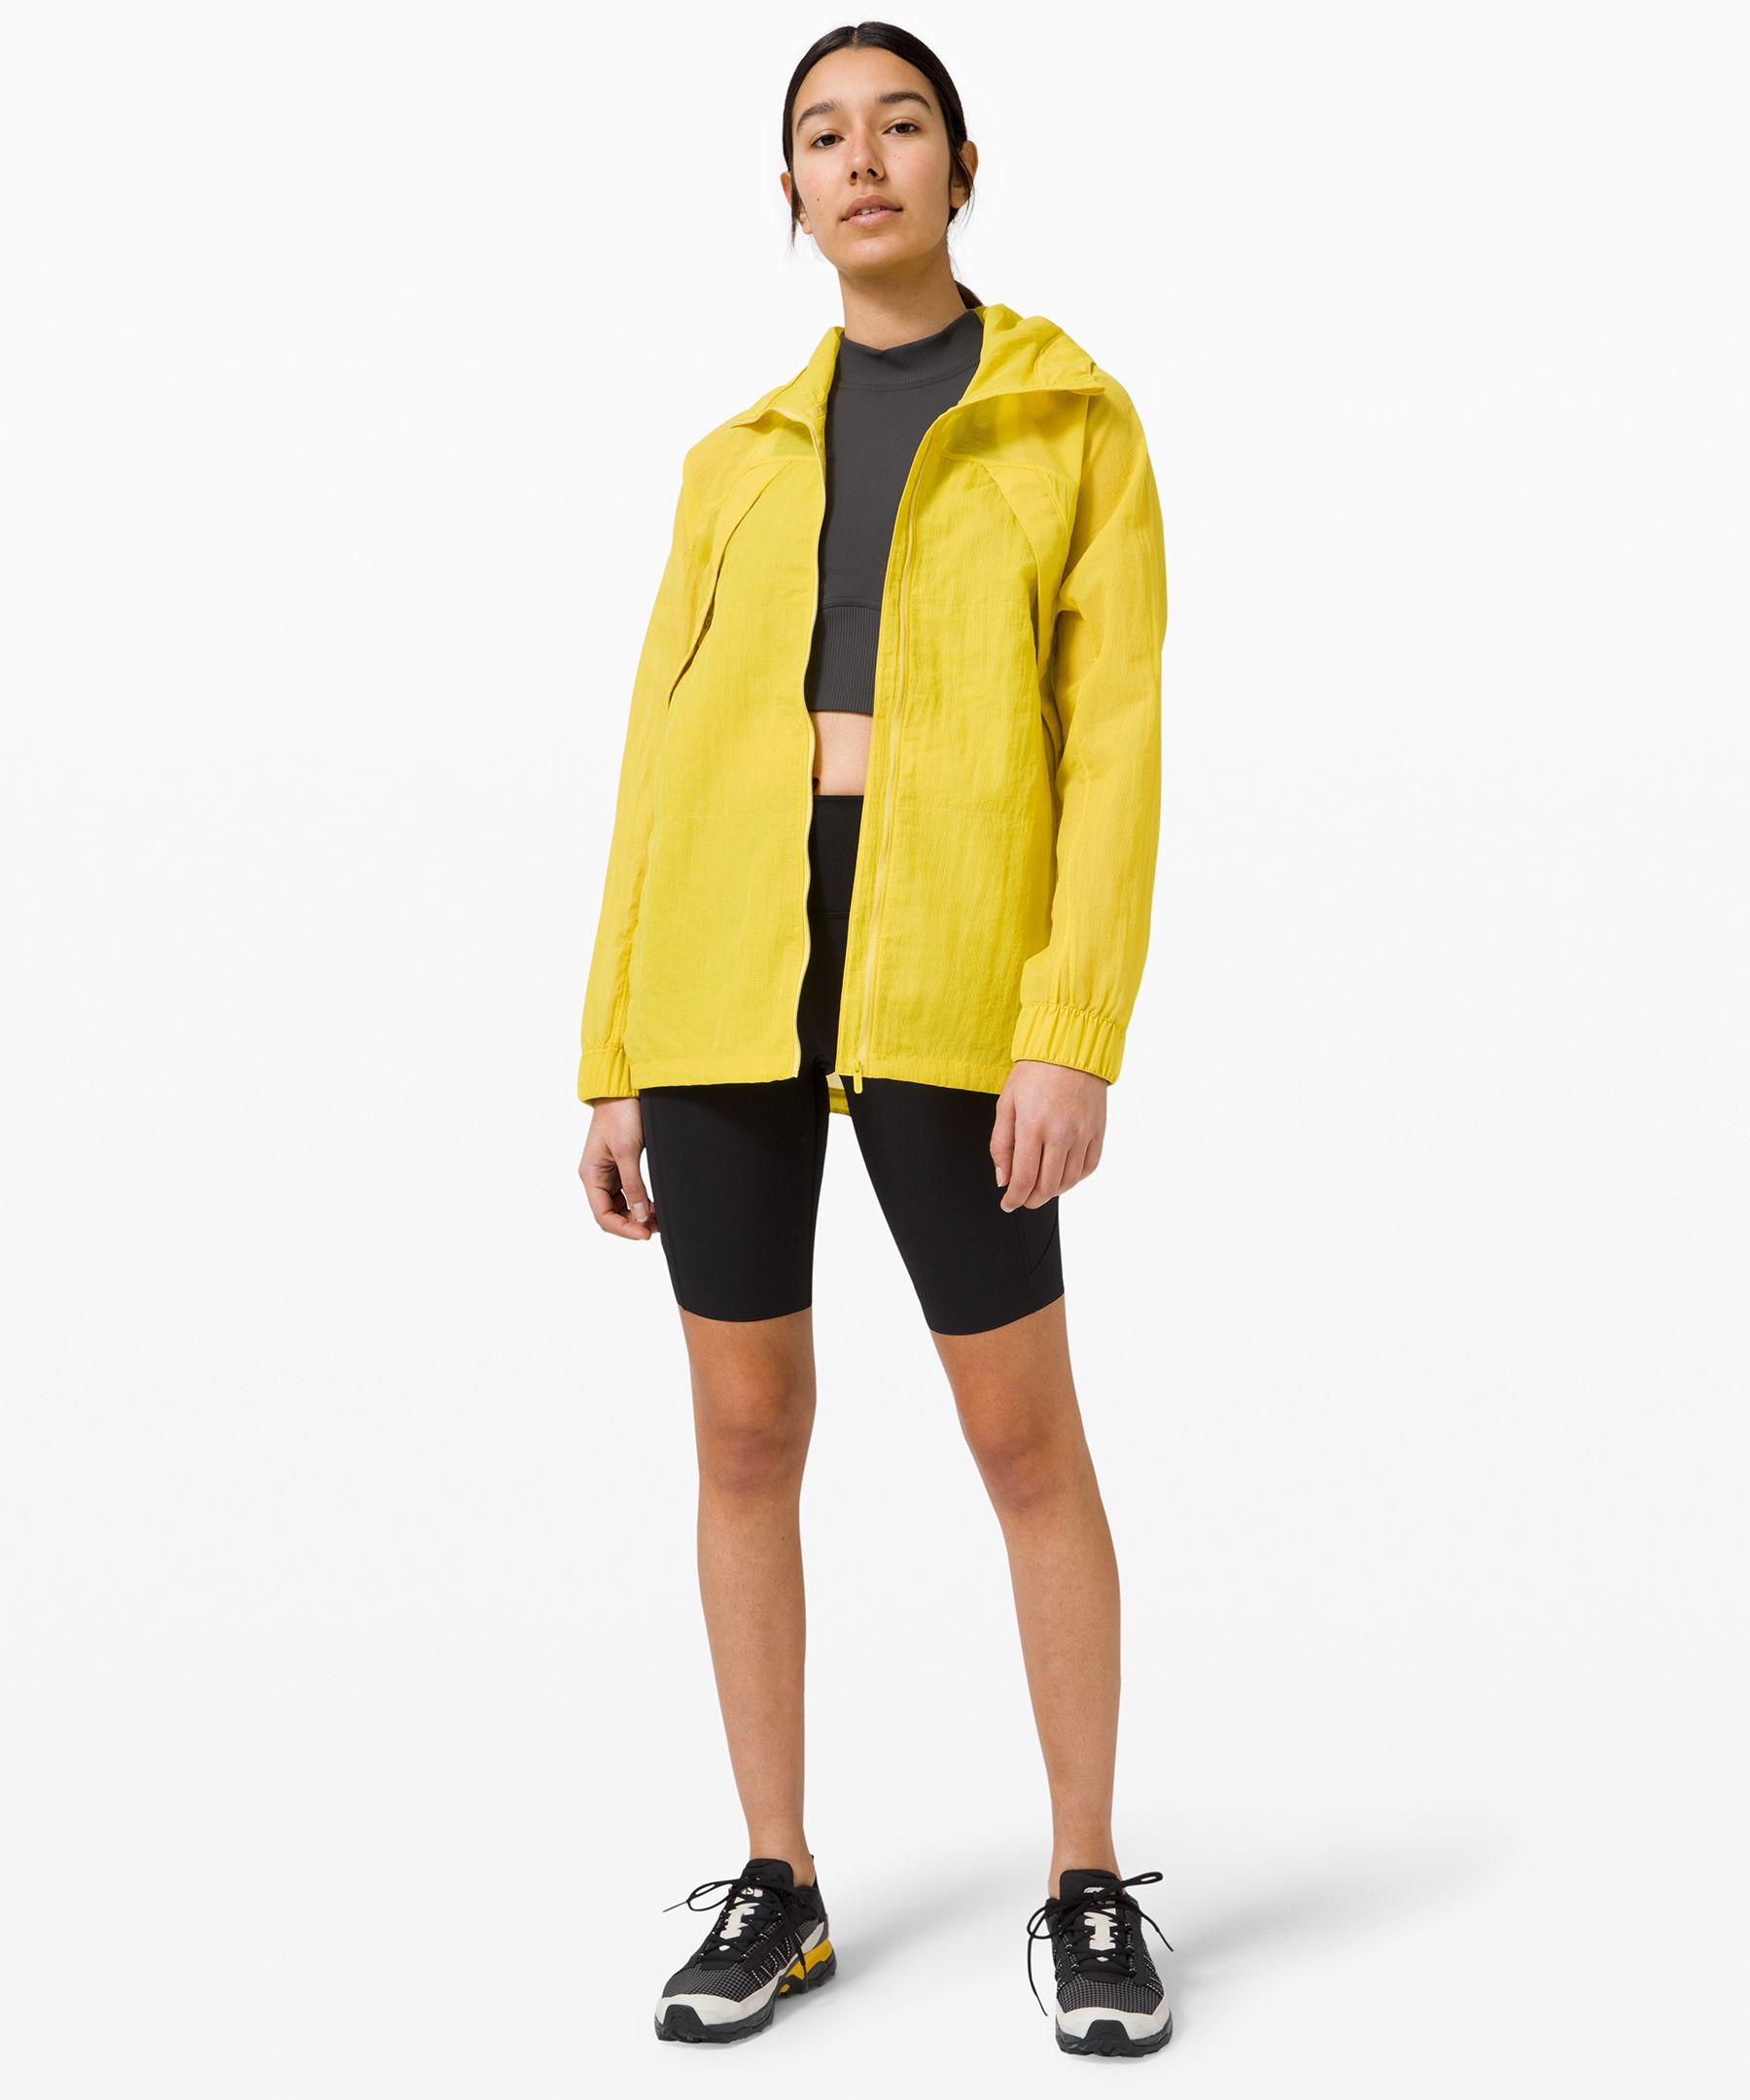 lululemon in the clear jacket